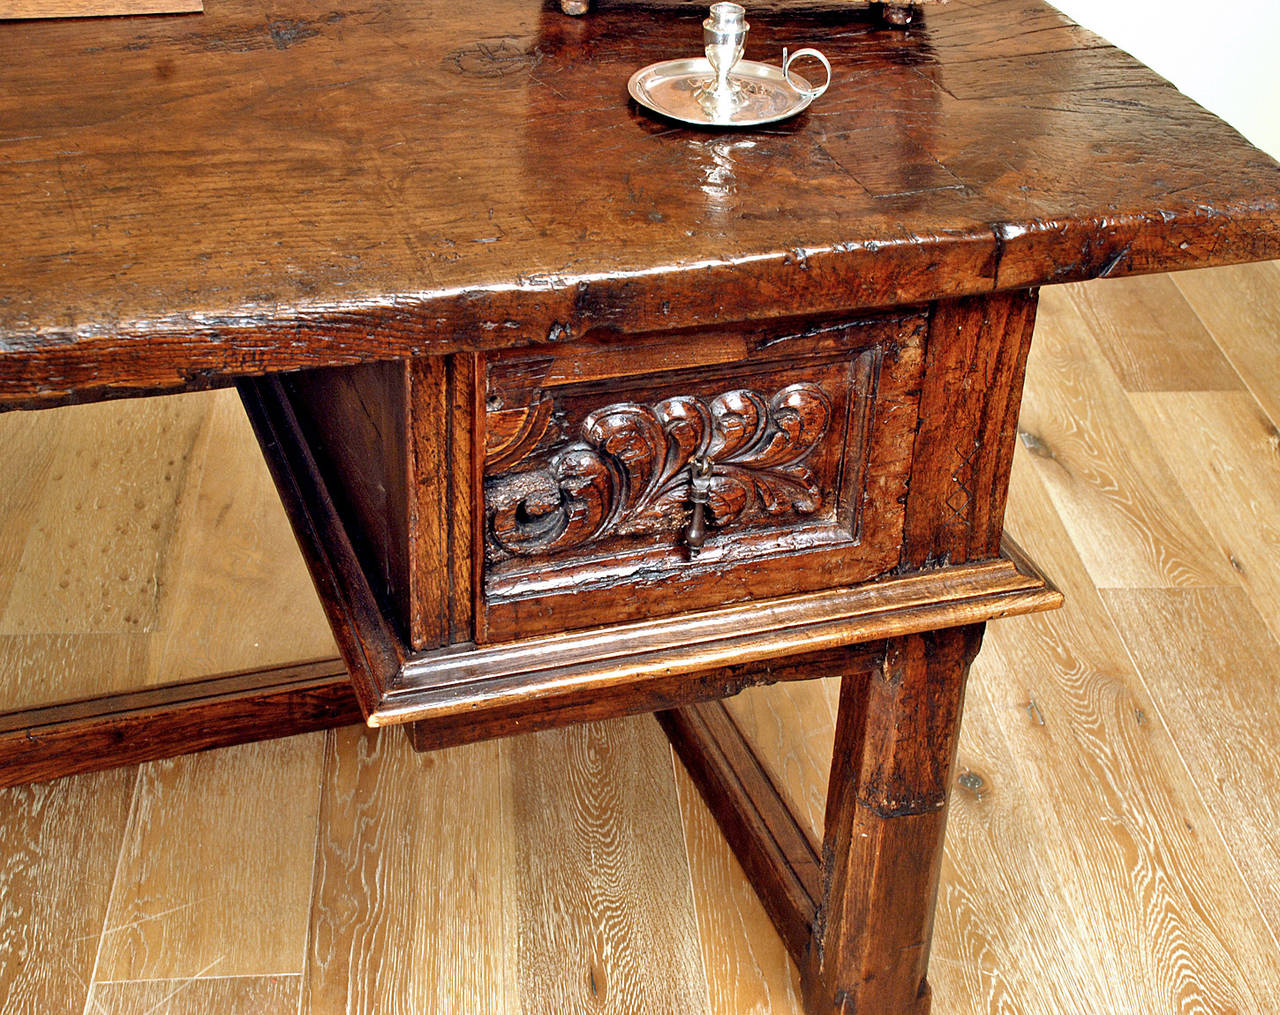 Late 17th Century Spanish Baroque Period Chestnut Kneehole Desk For Sale 2